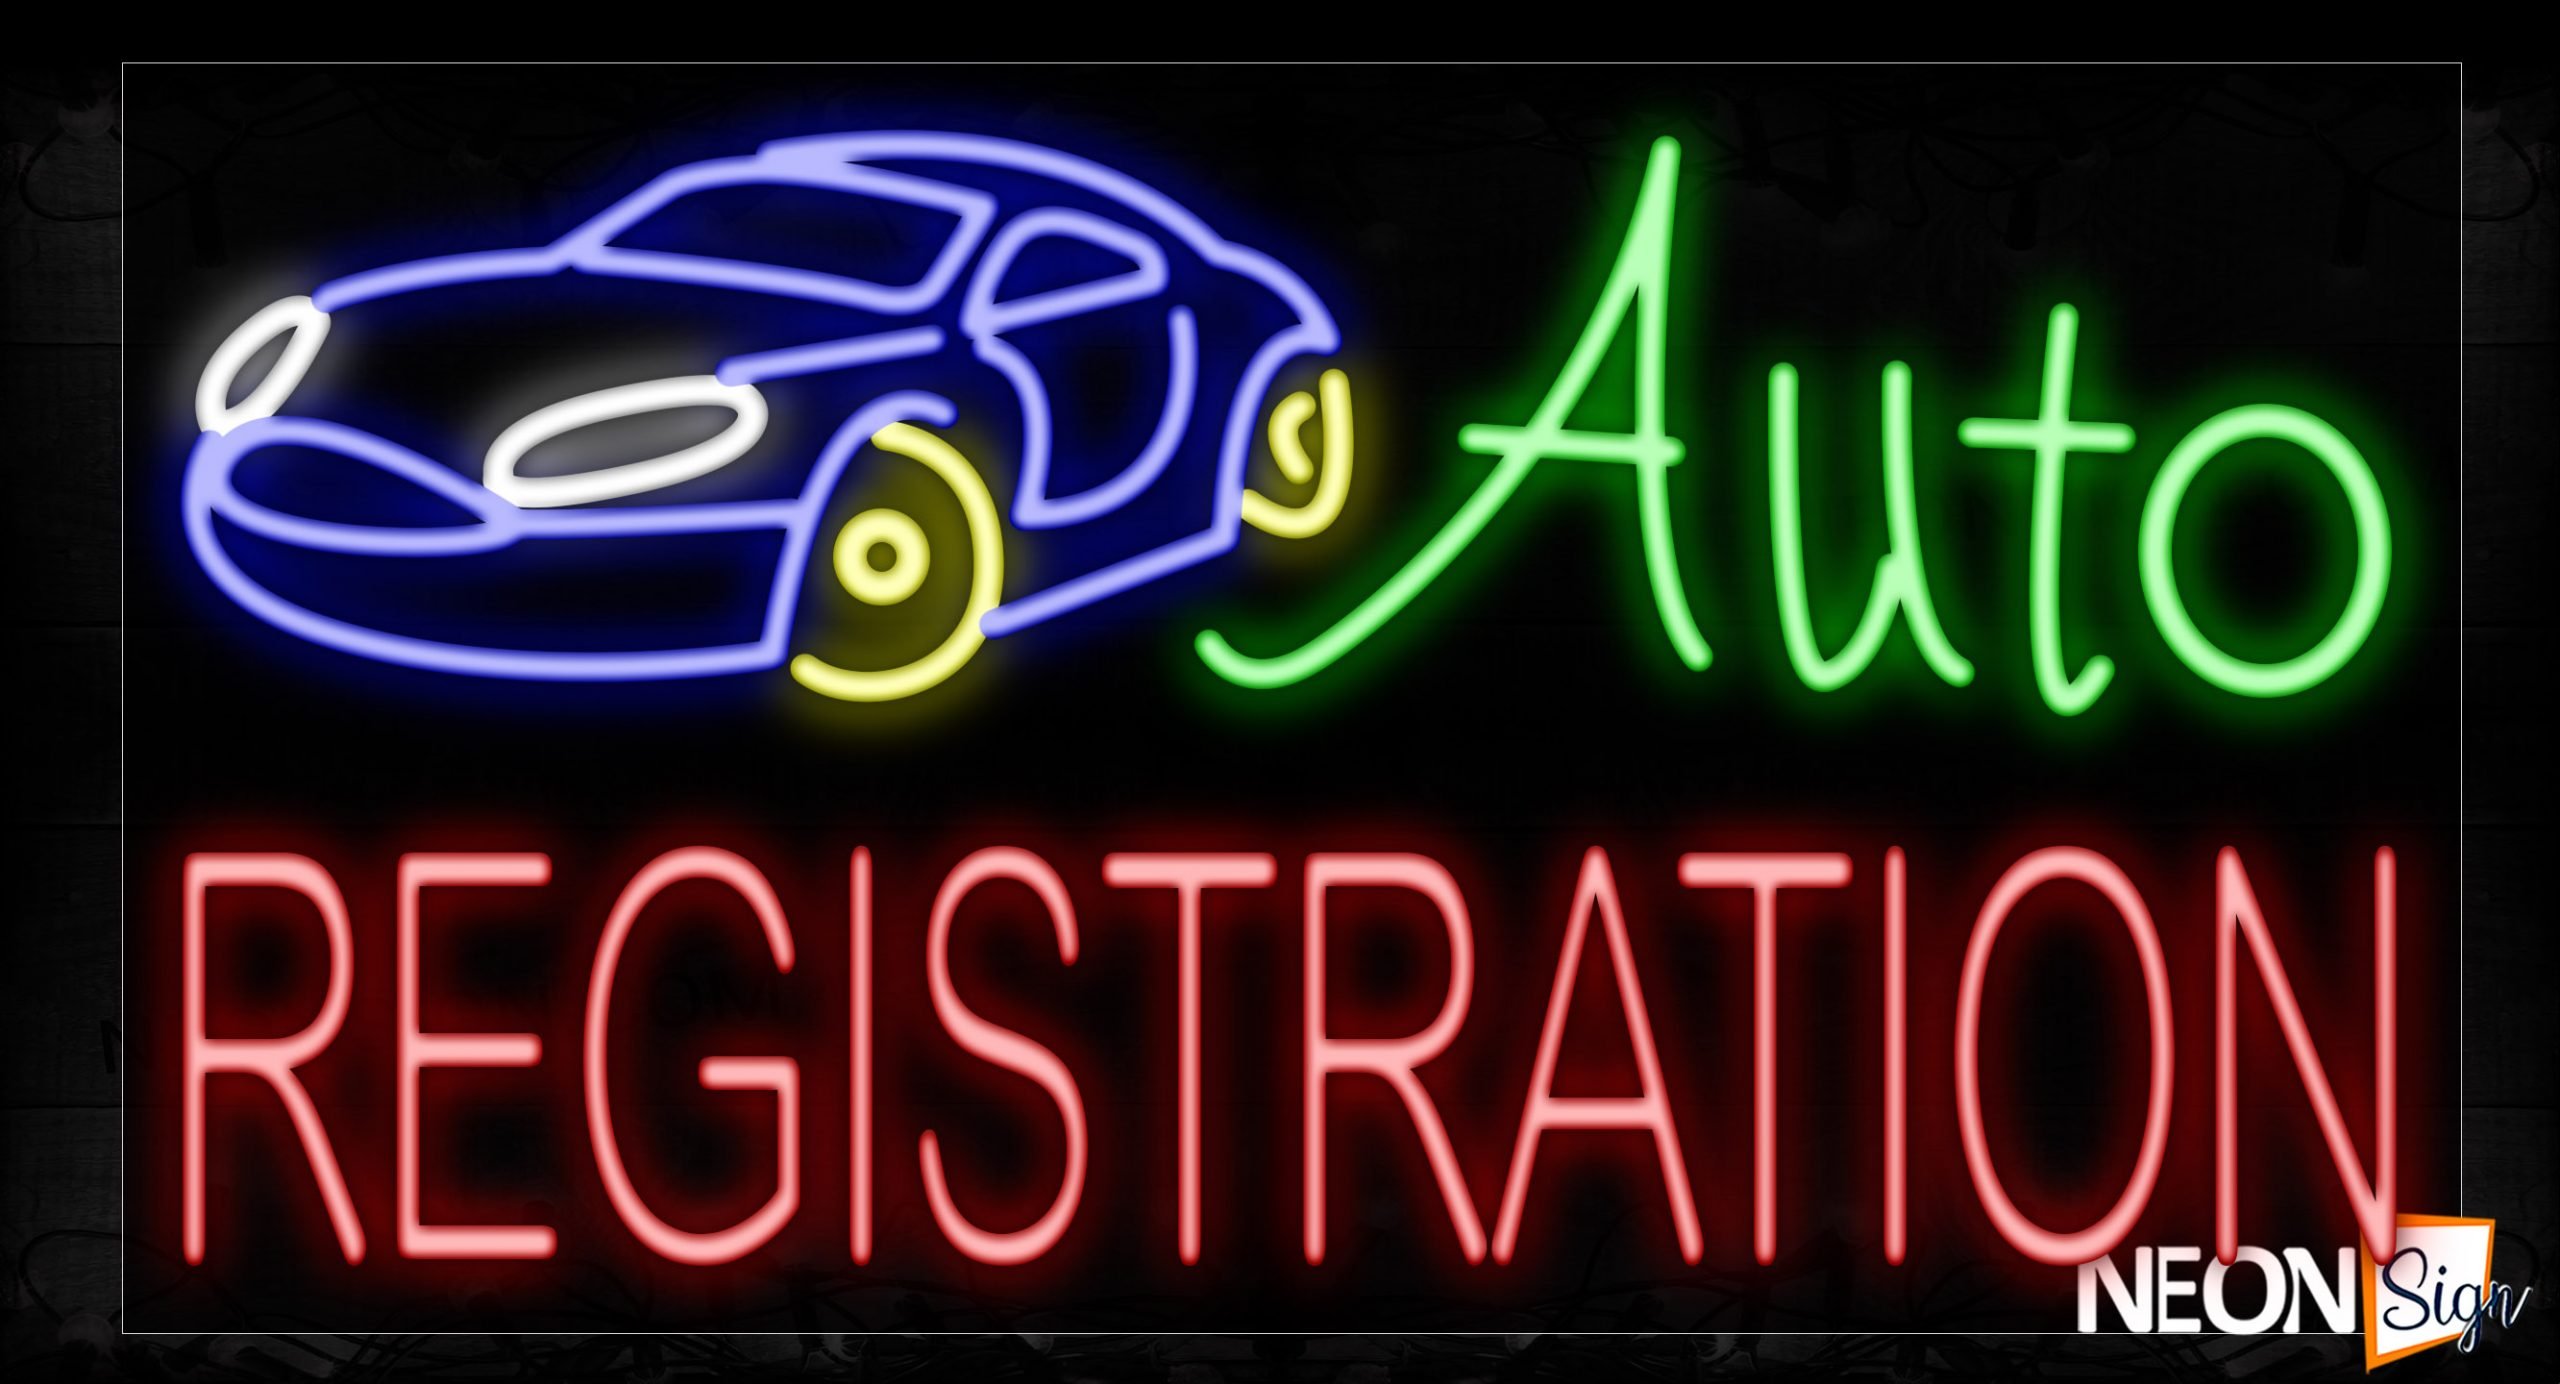 Image of 11654 Auto Registration With Car Logo Neon Signs_20x37 Black Backing